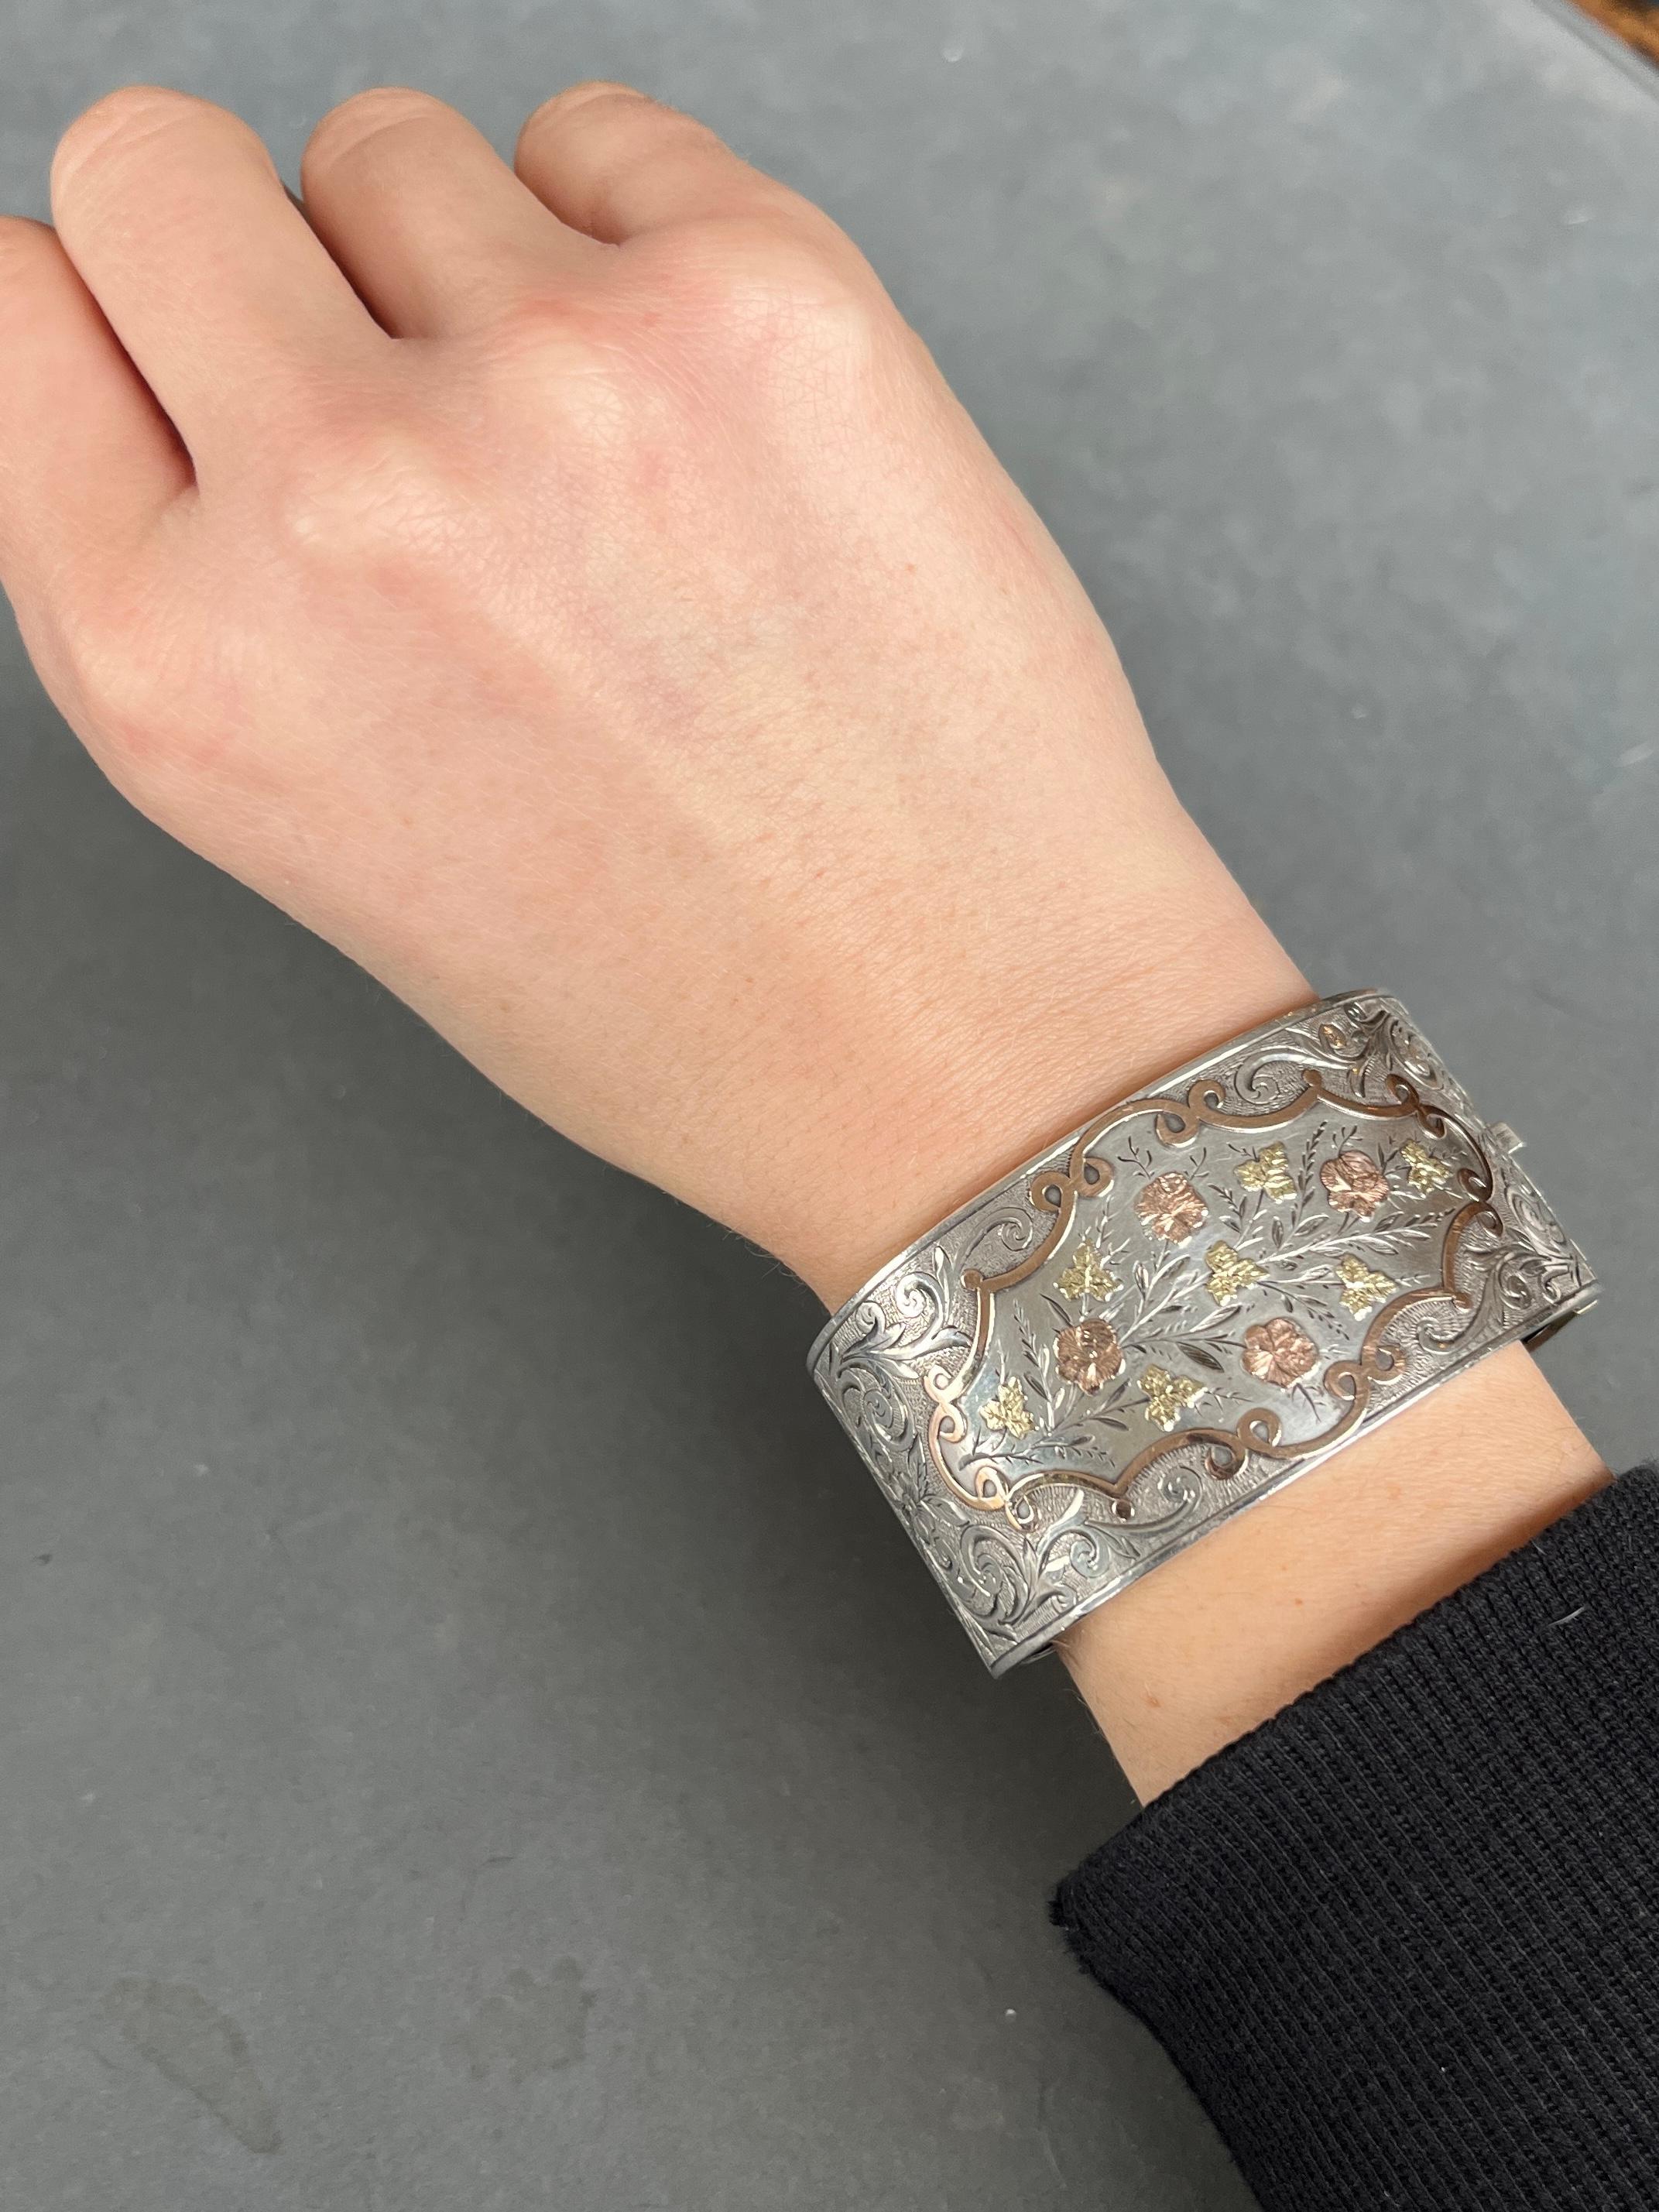 An exquisite antique bangle from the Victorian era circa 1880. Decorated with superb hand-chased detailing with yellow and rose gold overlay scroll, leaf and flower motifs. Modelled in silver.

Inner diameter: 5.7cm (from hinge to clasp)
Bangle